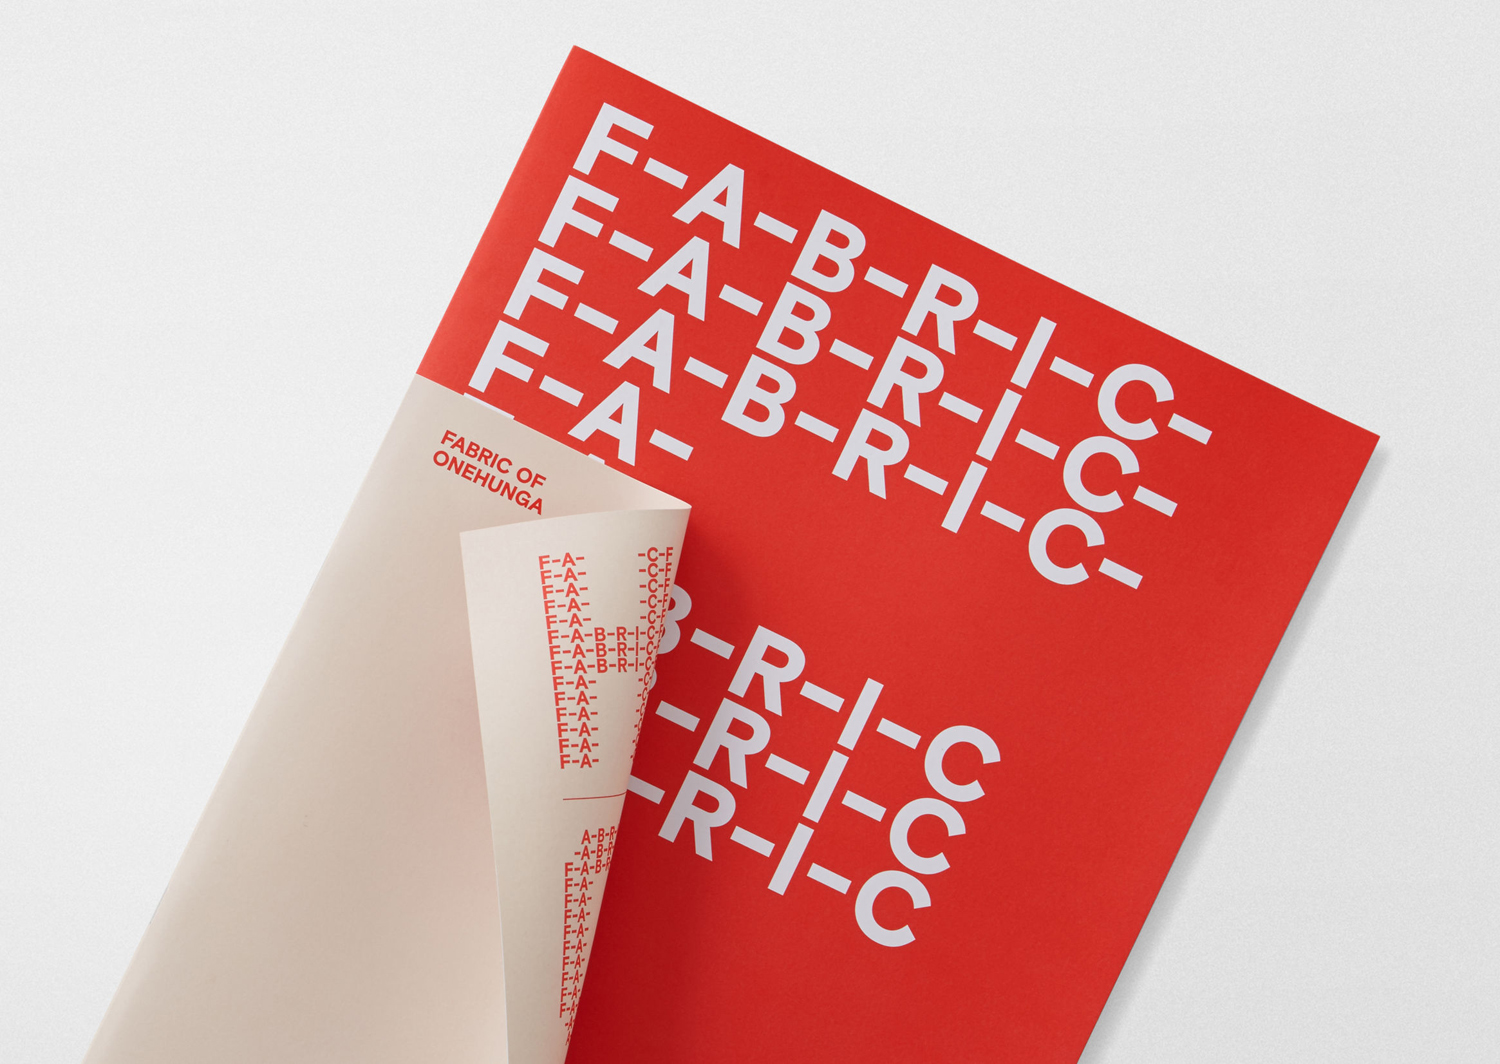 Inserts in Print – Fabric of Onehunga by Richards Partners, New Zealand